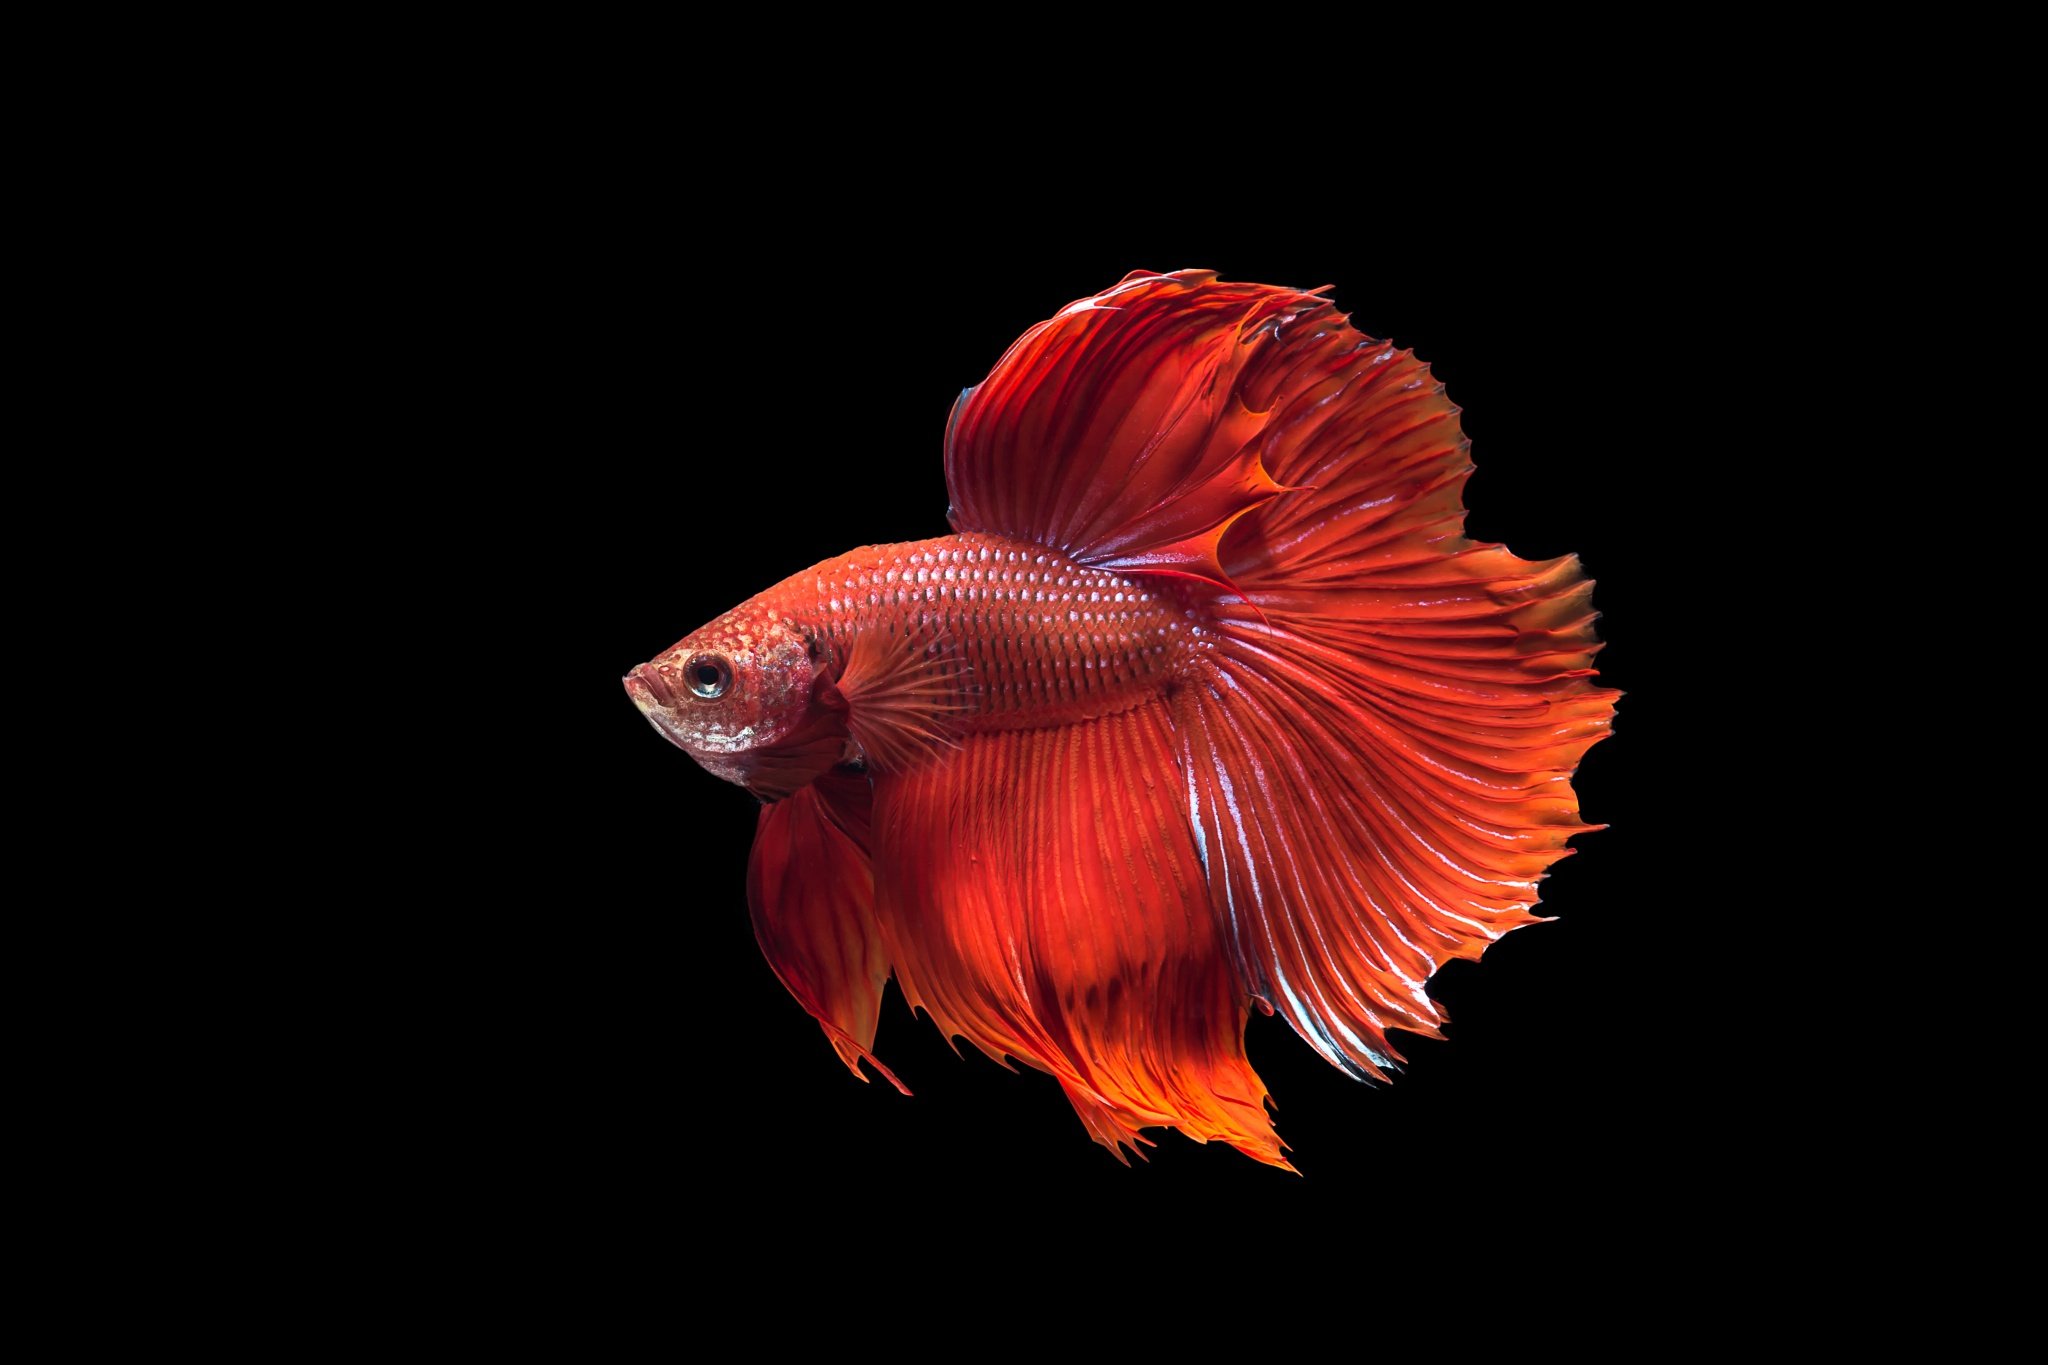 Wallpaper ID 754005  motion multi colored blue animal themes  swimming nature Colorful indoors one animal no people vertebrate  betta Siamese water Fighting fish free download